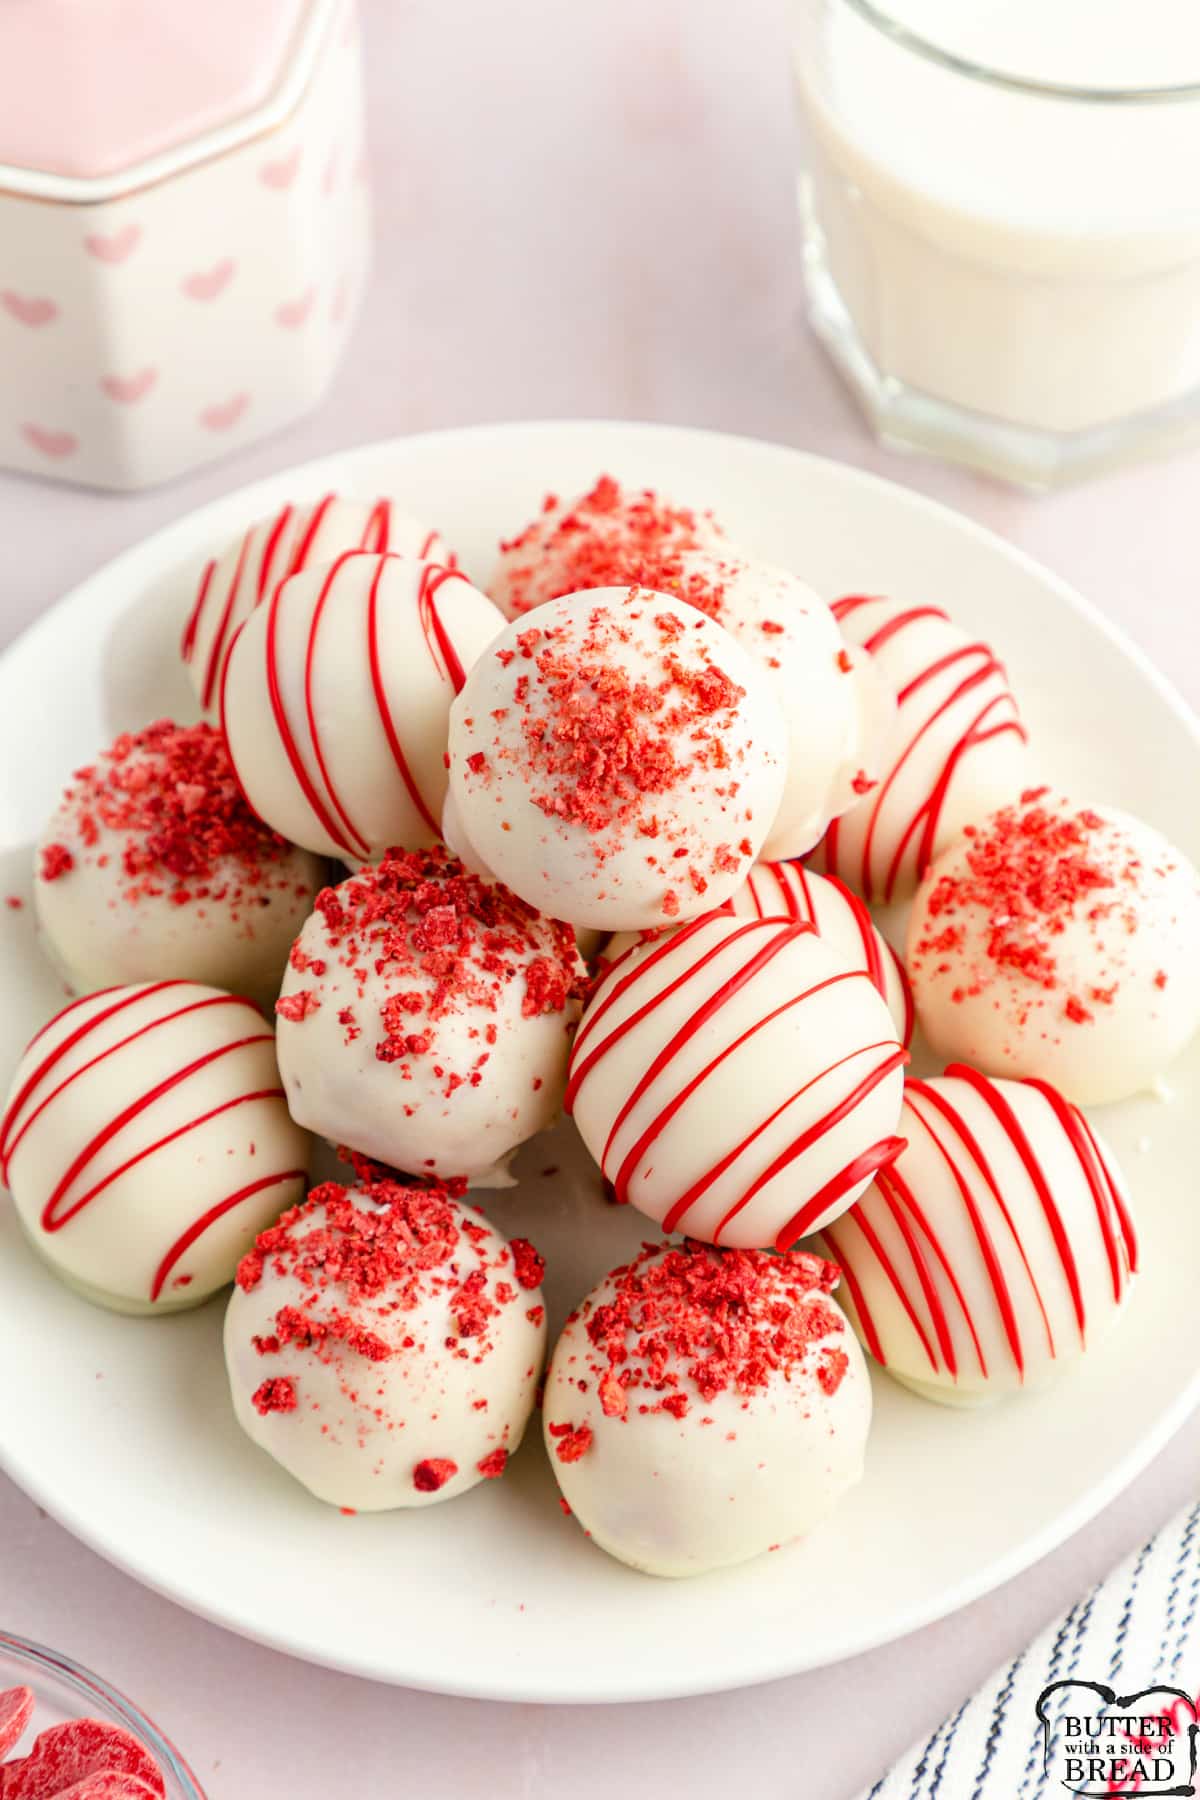 Cake balls made with freeze dried strawberries, a dry cake mix and cream cheese